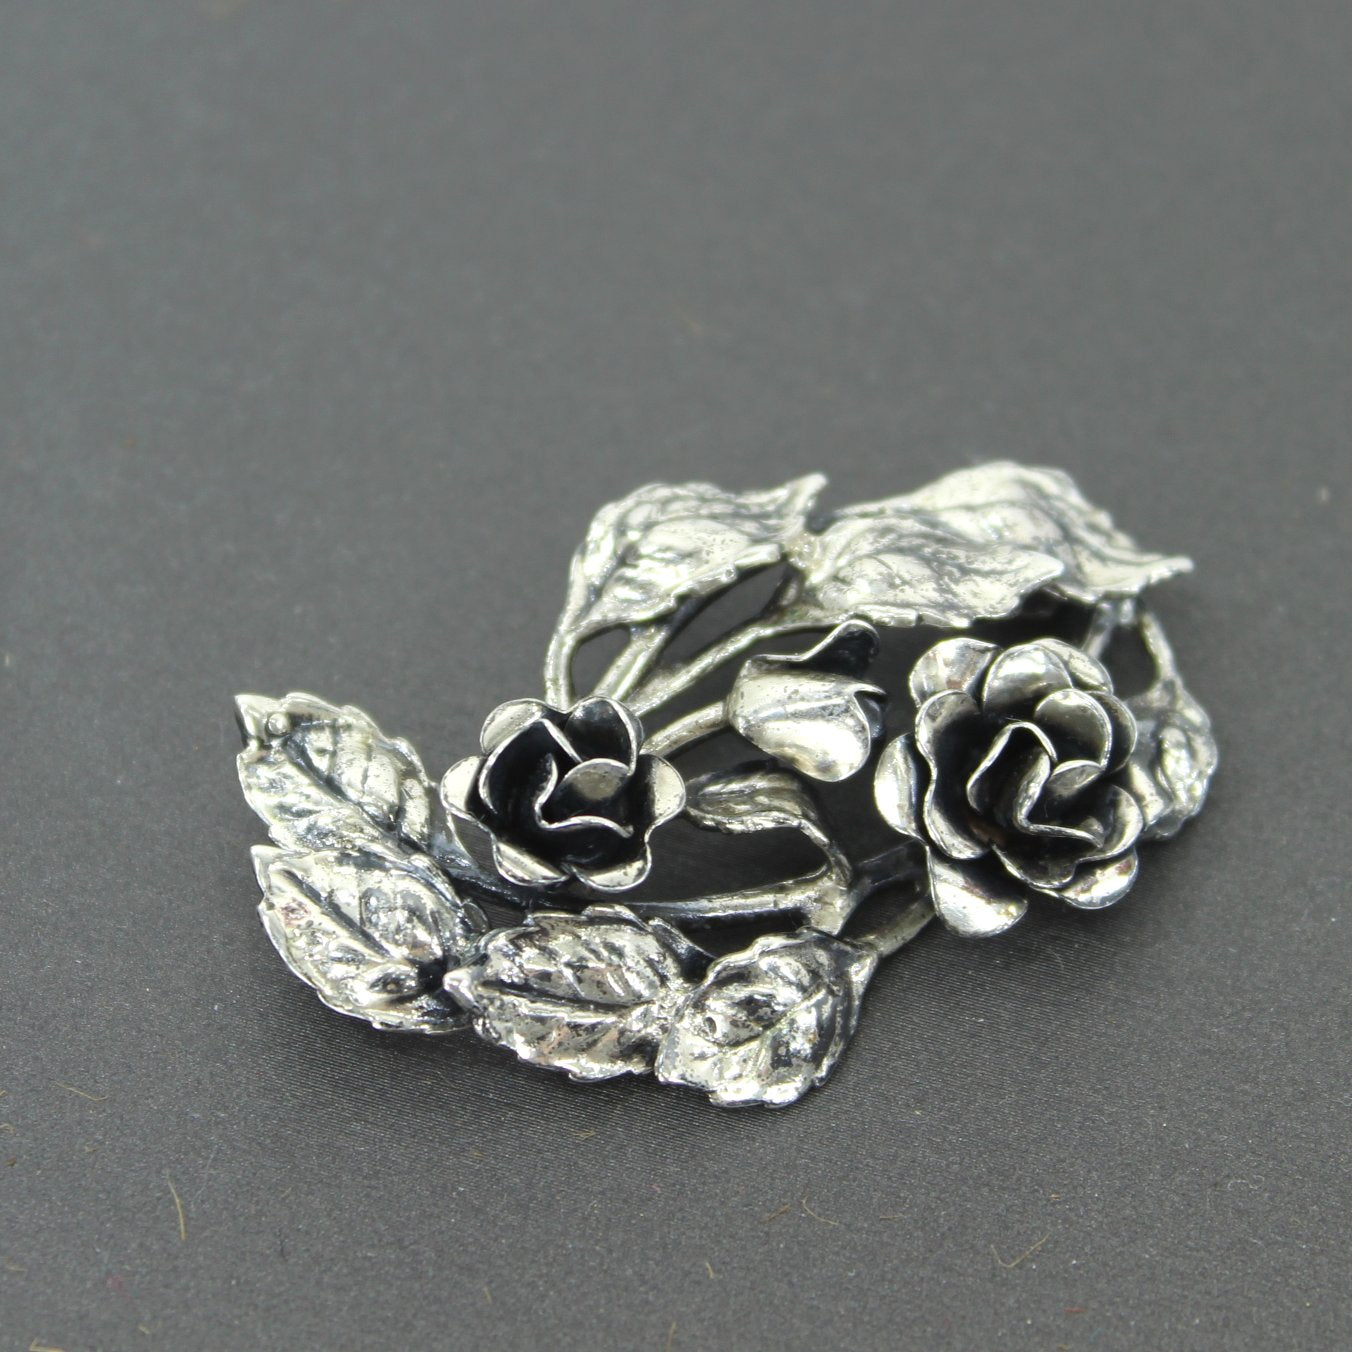 Danecraft Vintage Pendant Necklace 925 Sterling Dimensional Roses Leaves closeup of pin